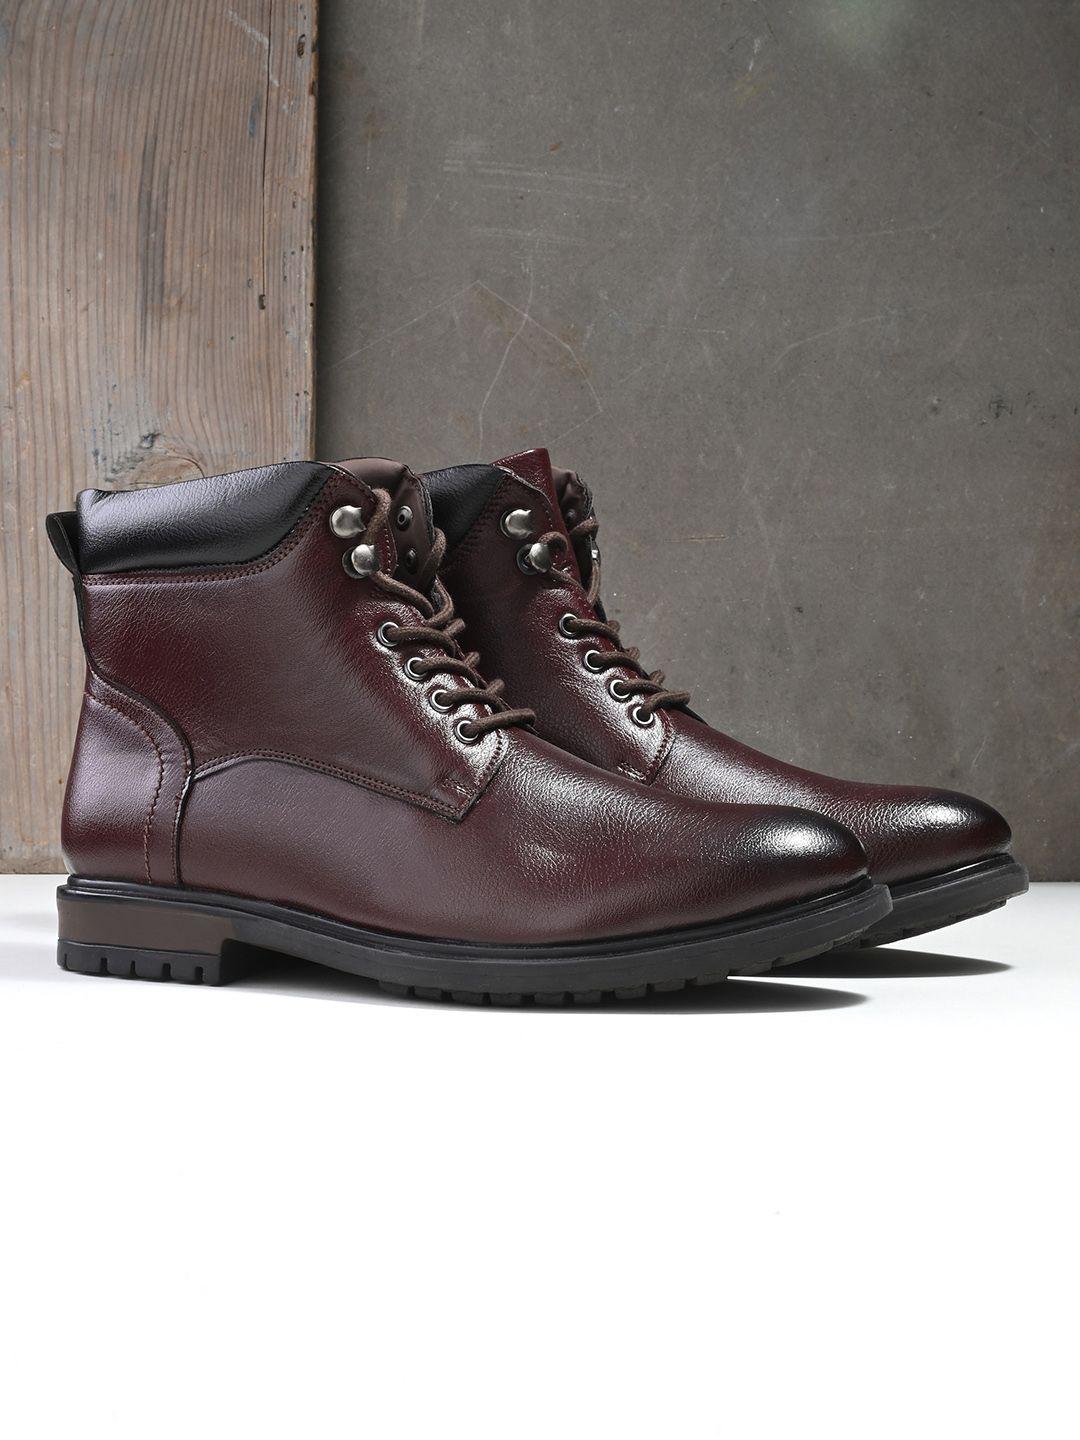 the roadster lifestyle co. men textured regular boots